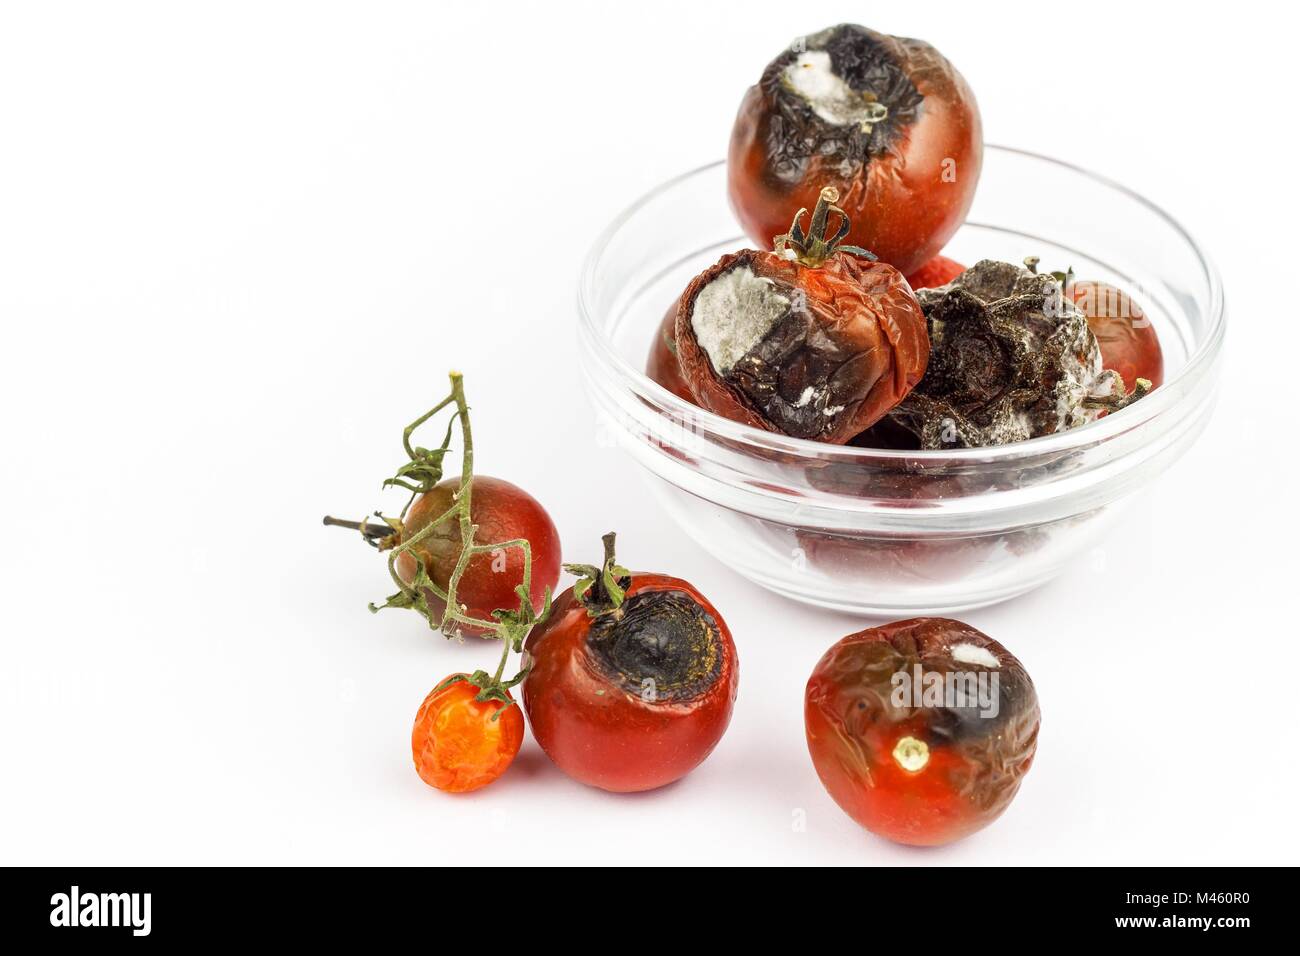 https://c8.alamy.com/comp/M460R0/moldy-tomatoes-in-a-glass-bowl-on-a-white-background-unhealthy-food-M460R0.jpg